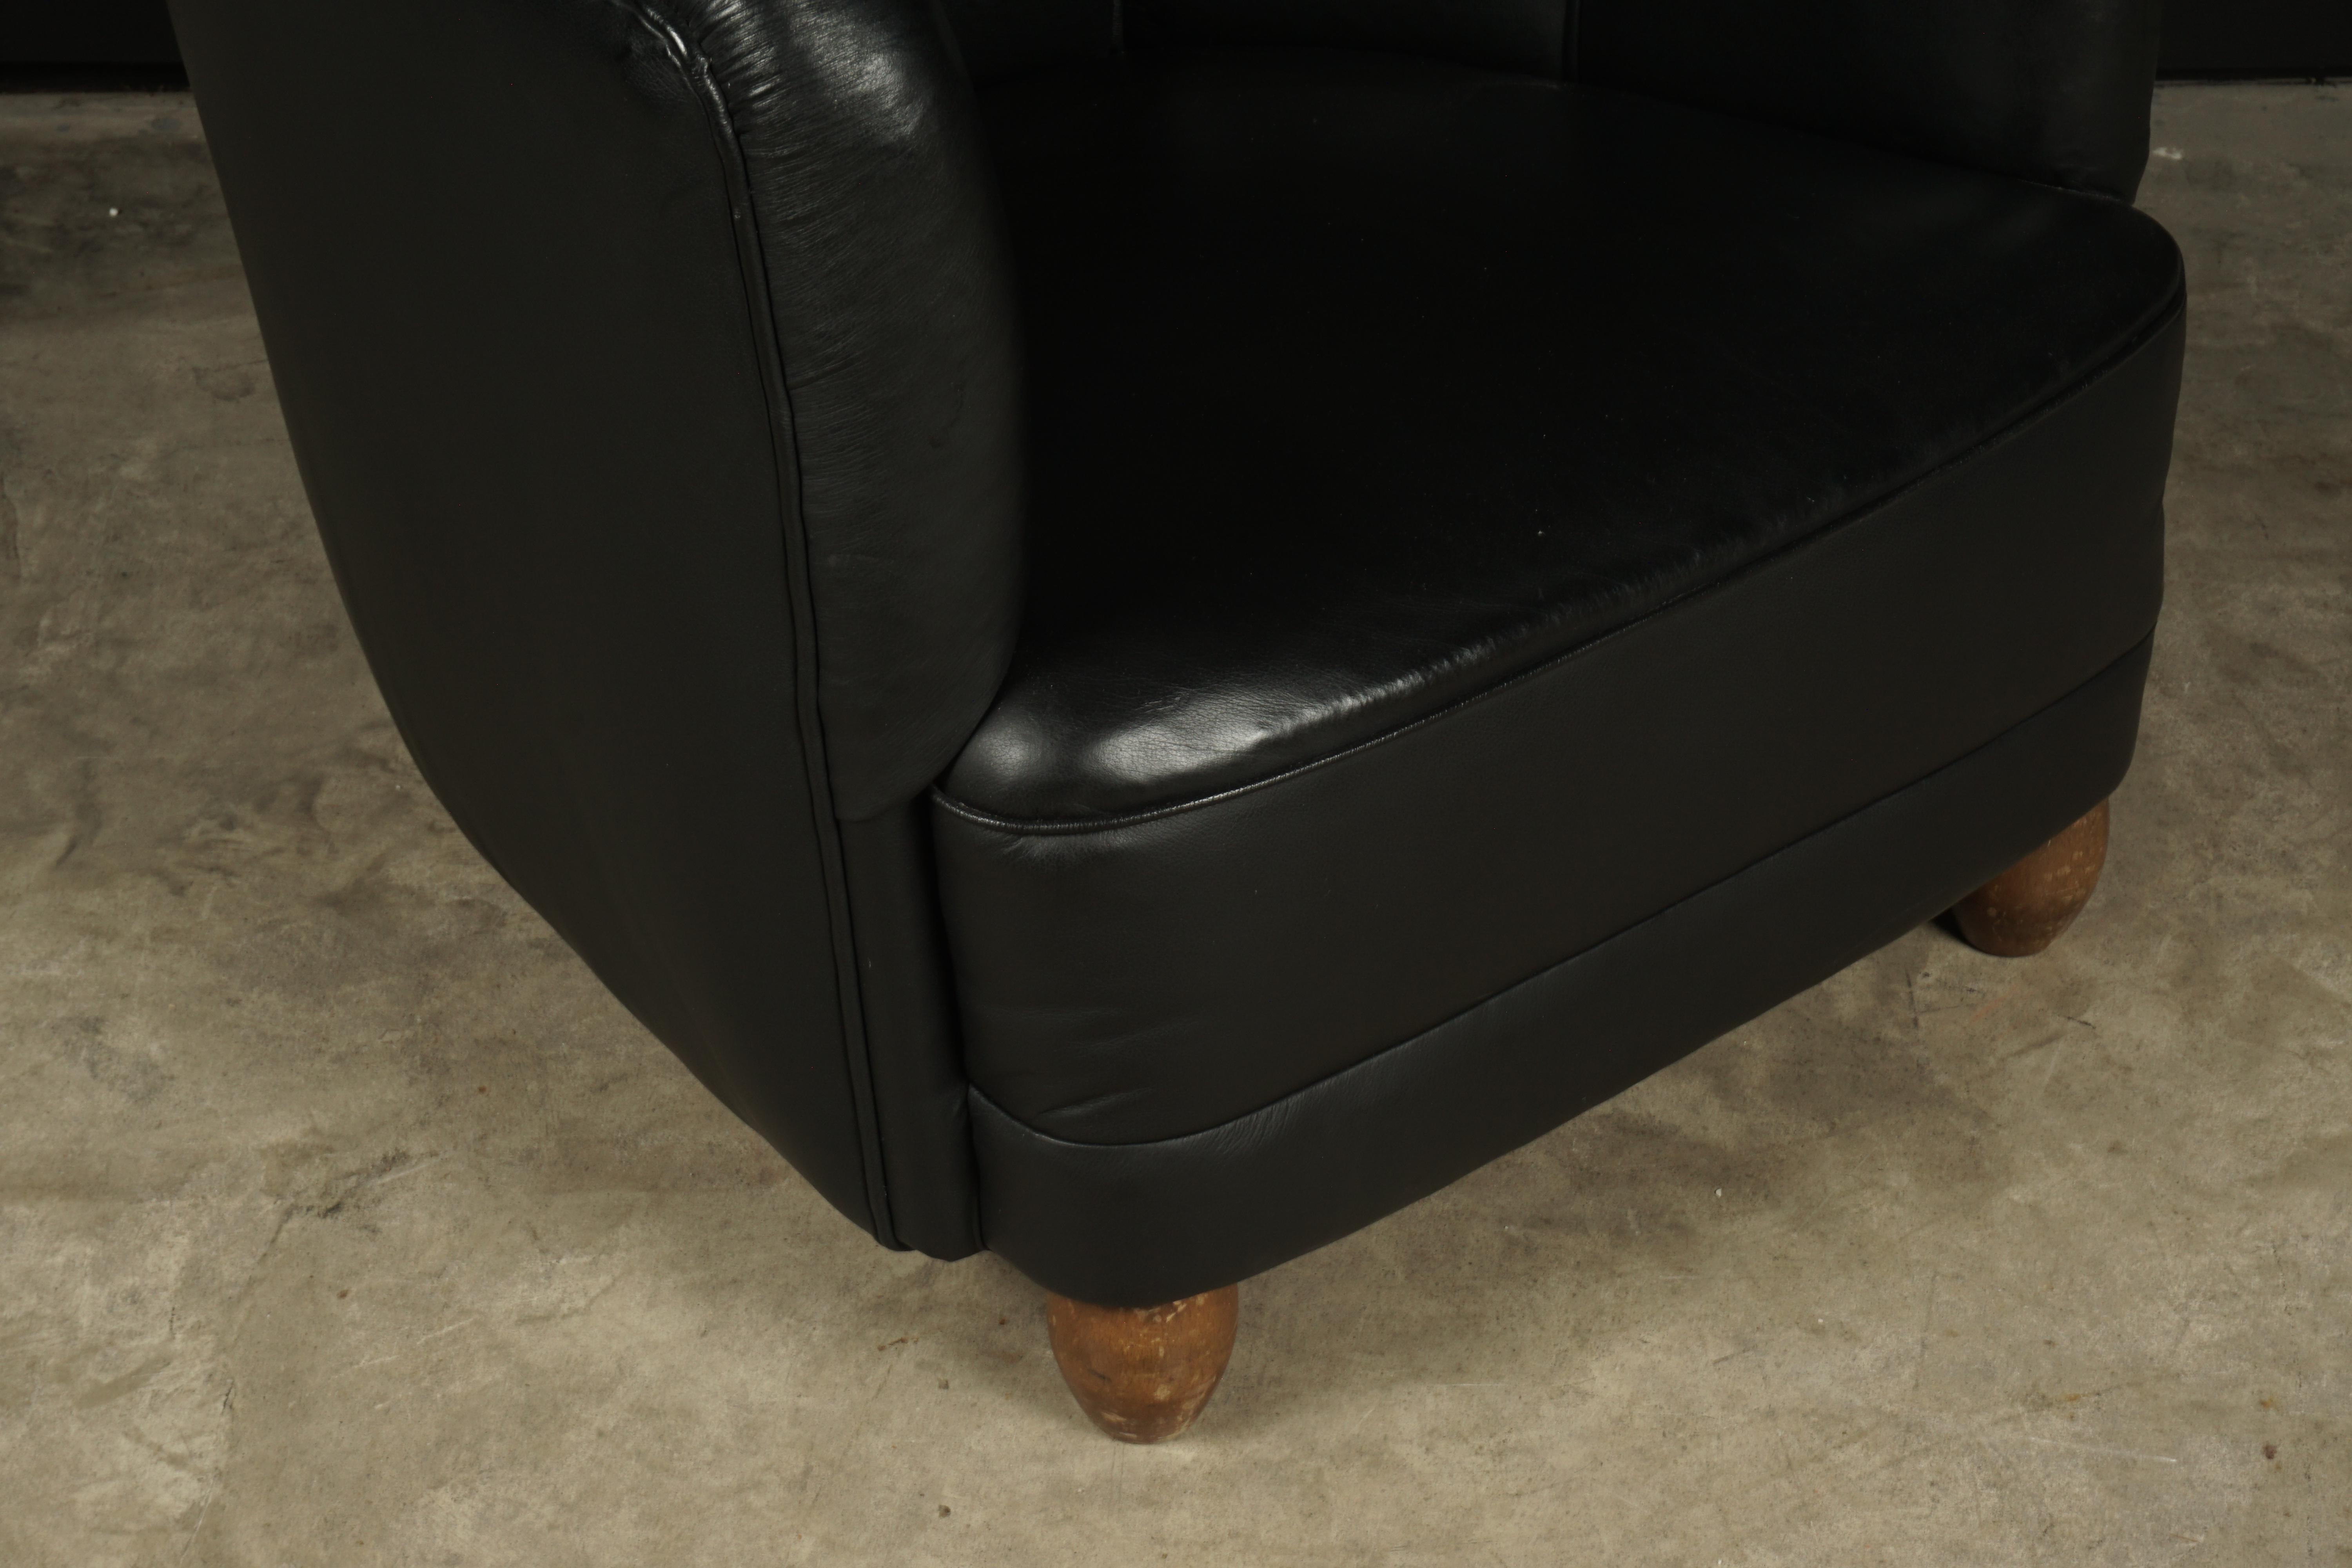 Vintage leather club chair from Denmark, circa 1950. Original black leather upholstery with nice patina and wear.
 